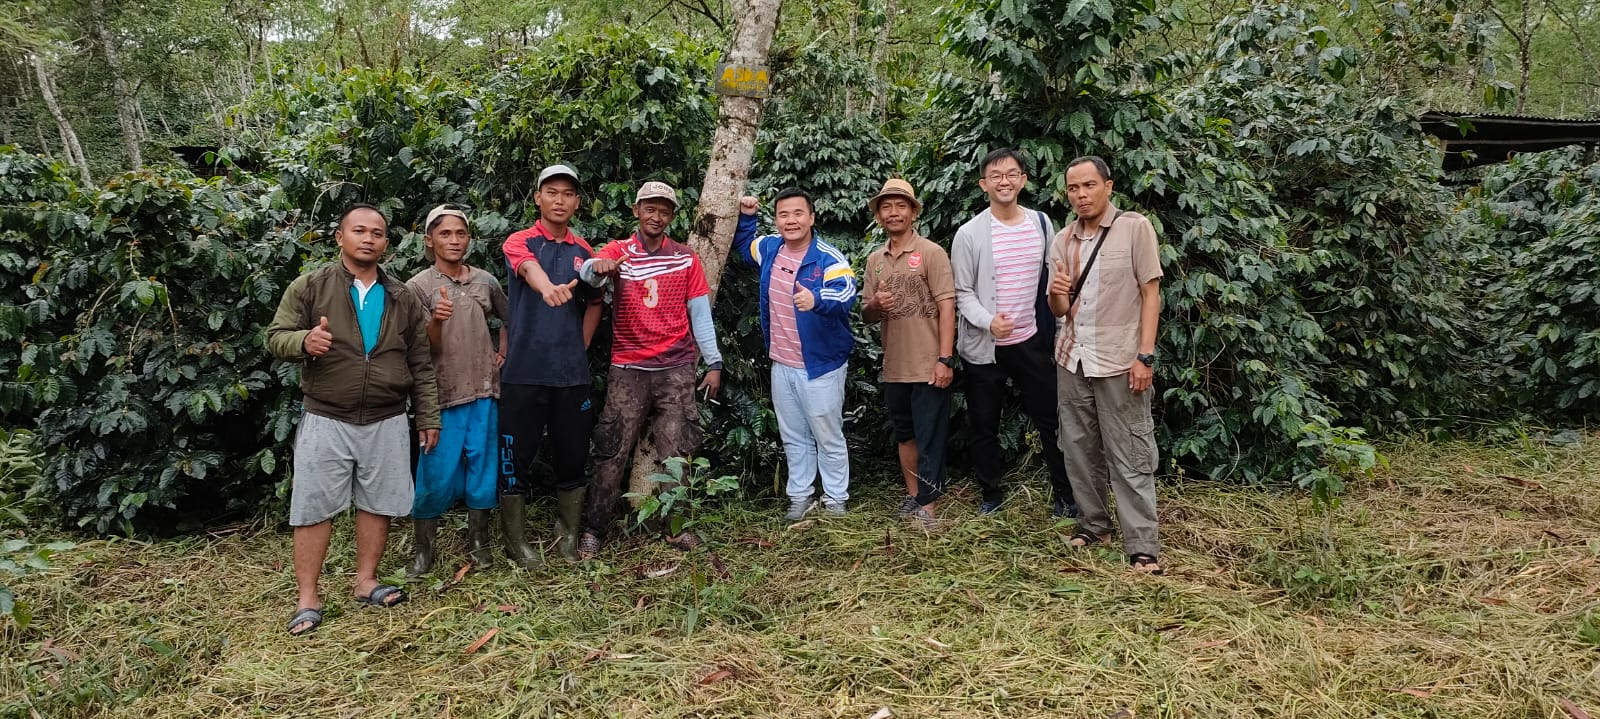 Load video: Our team in wild luwak coffee plantation